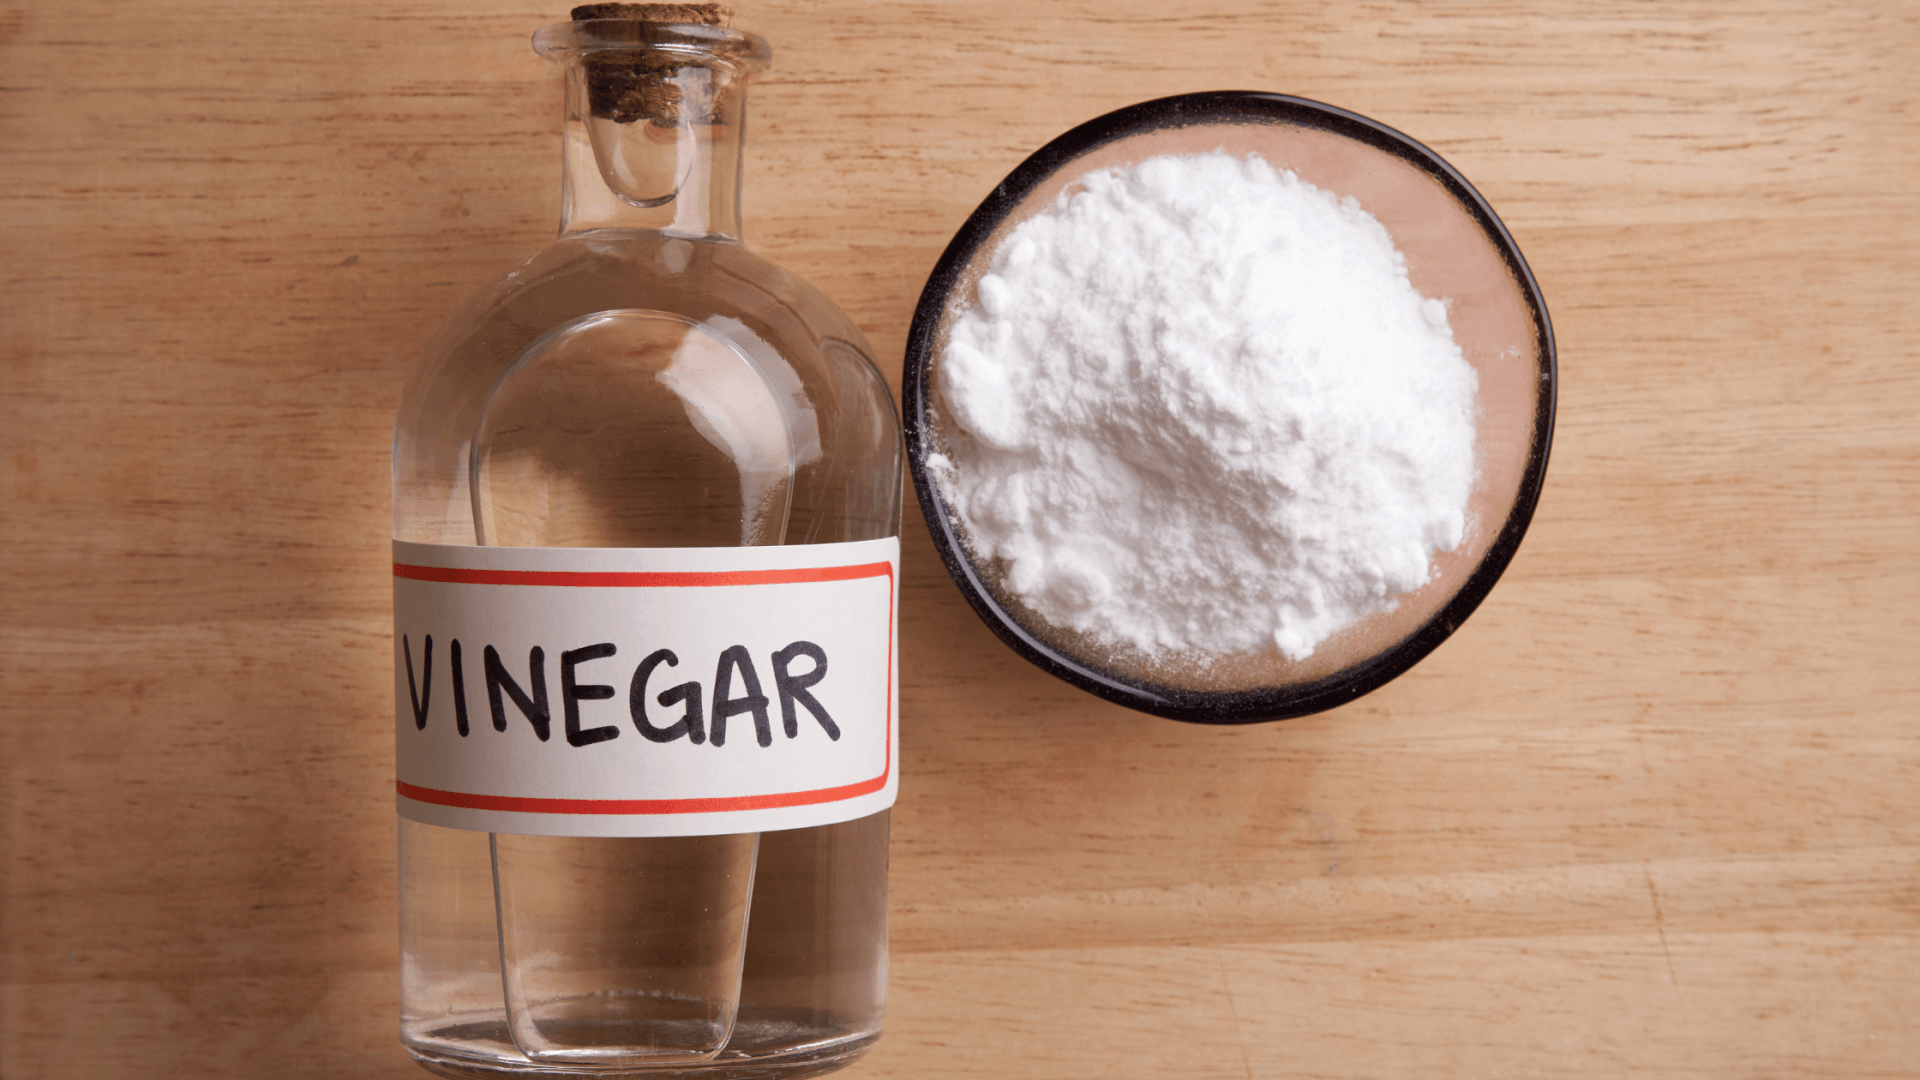 A glass of vinegar and 1 cup of baking soda